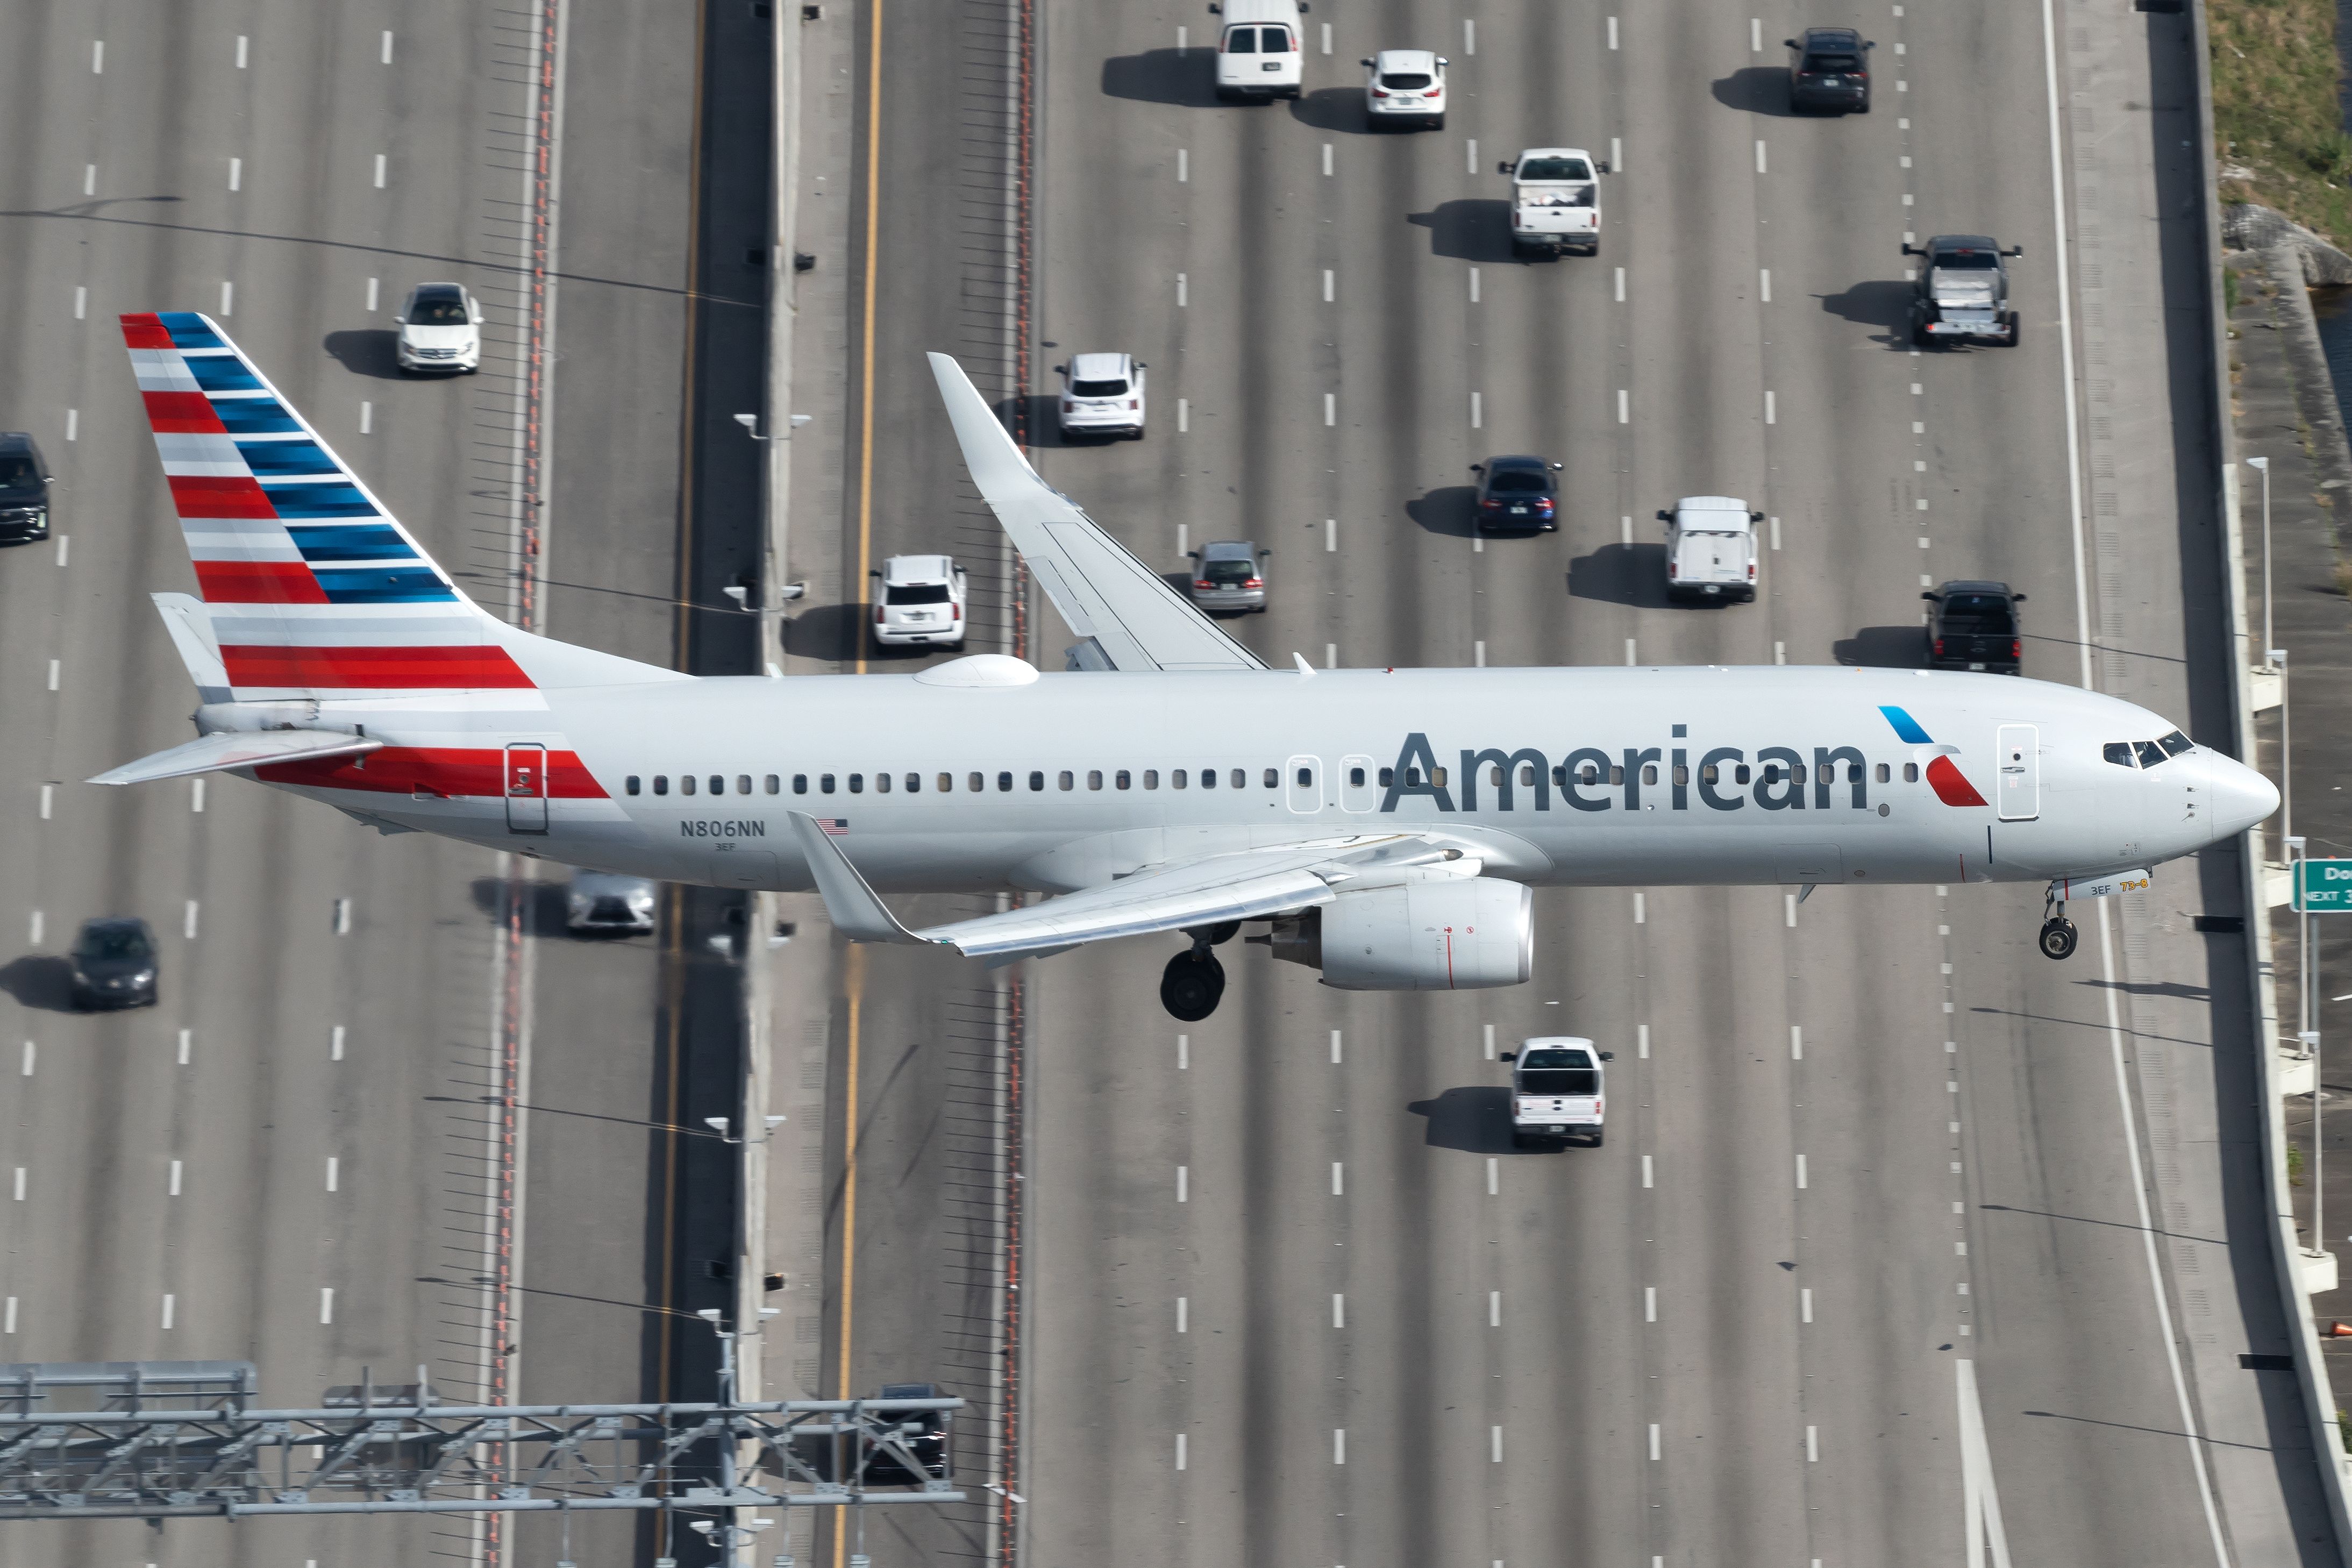 An American Airlines Boeing 737-800 flying over a highway just before landing.